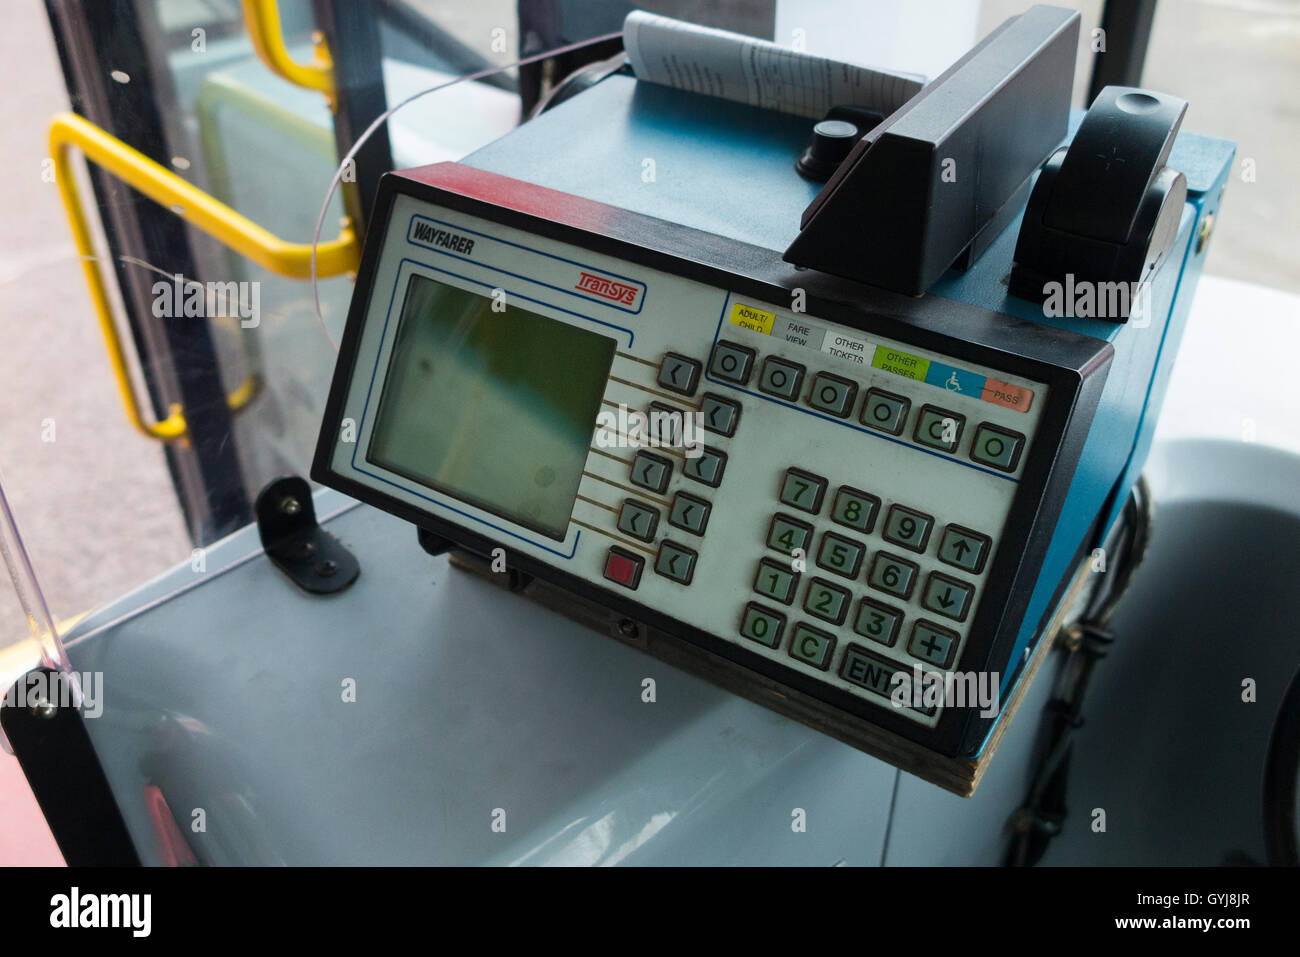 Wayfarer Transys early Oyster card reader / validator / validators & ticket machine seen from the driver's seat of a London bus. Stock Photo